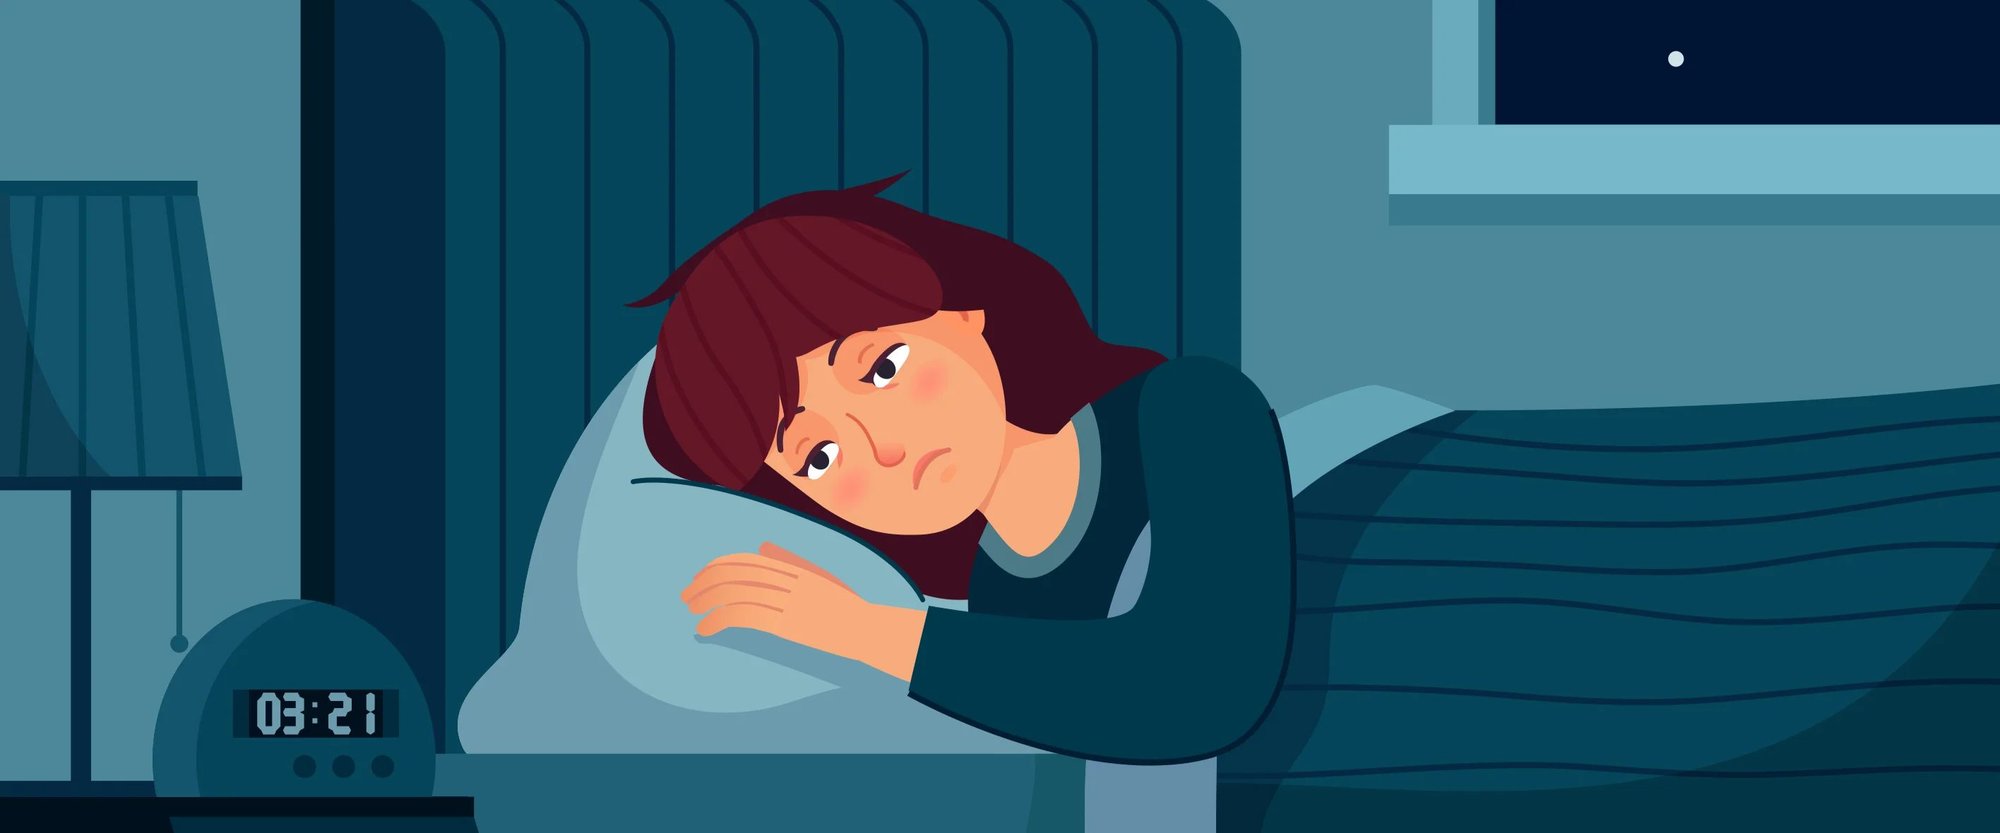 Illustration of woman in bed who can't fall asleep